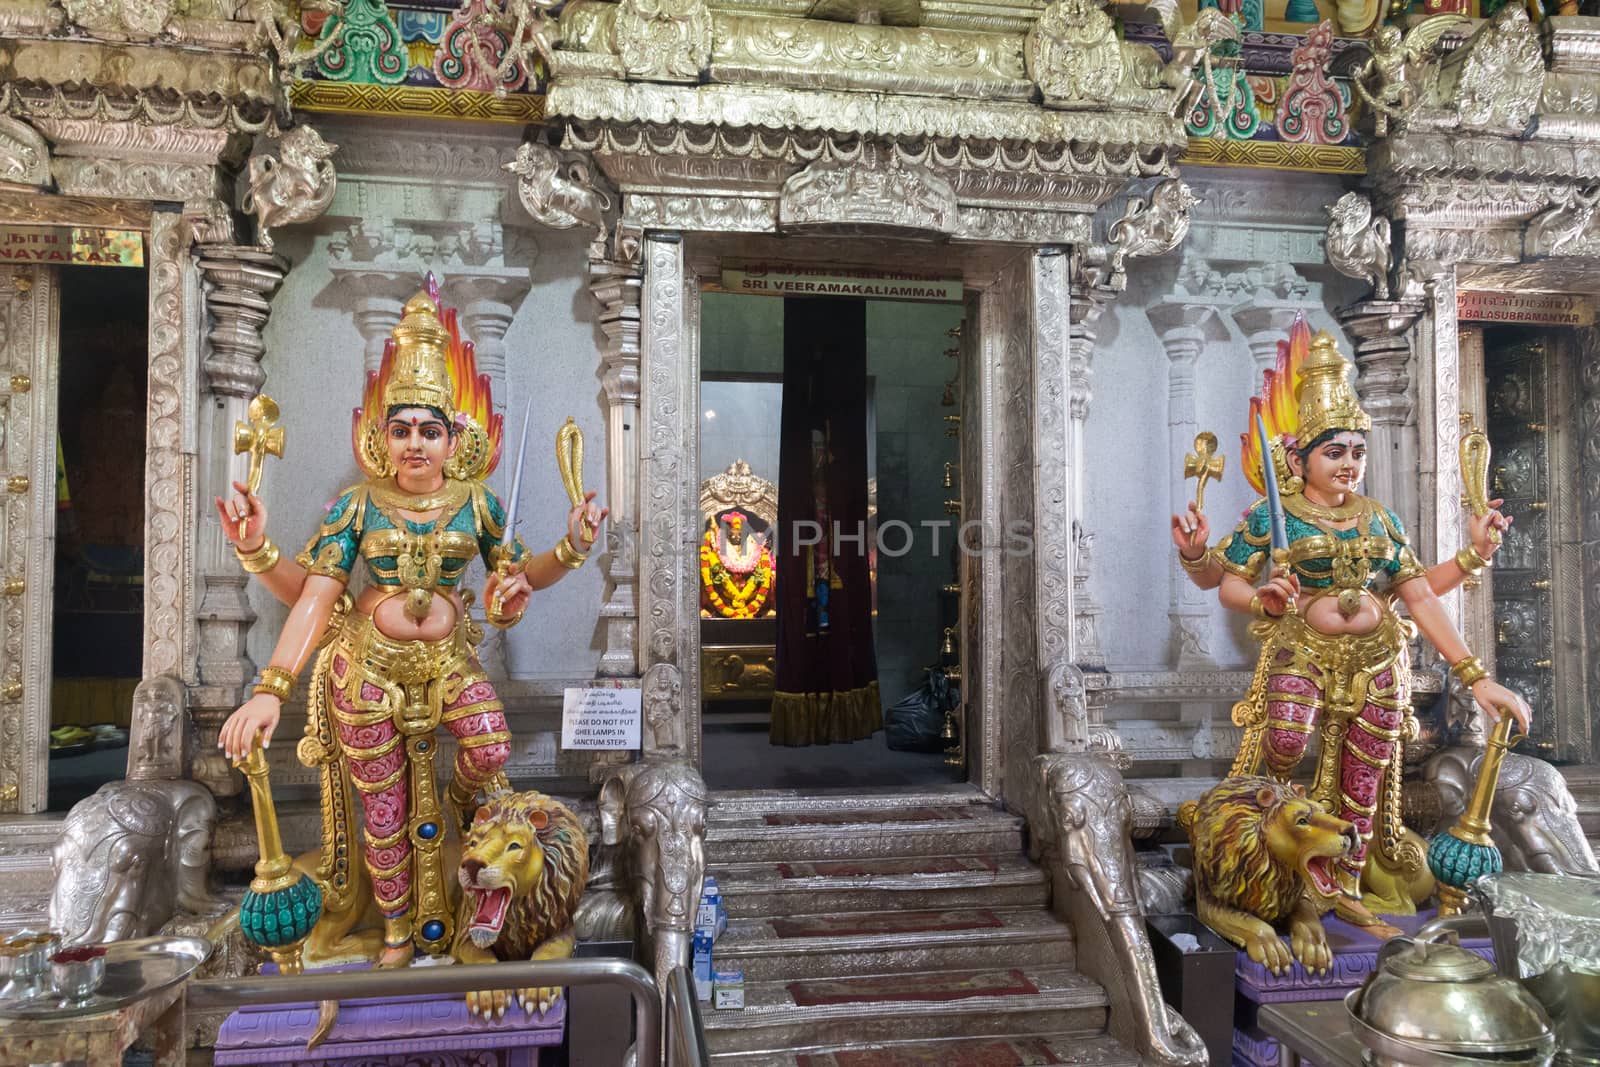 Singapore, Singapore - January 31, 2015: Statues at the entrance to the Hindu temple in the district Little India.